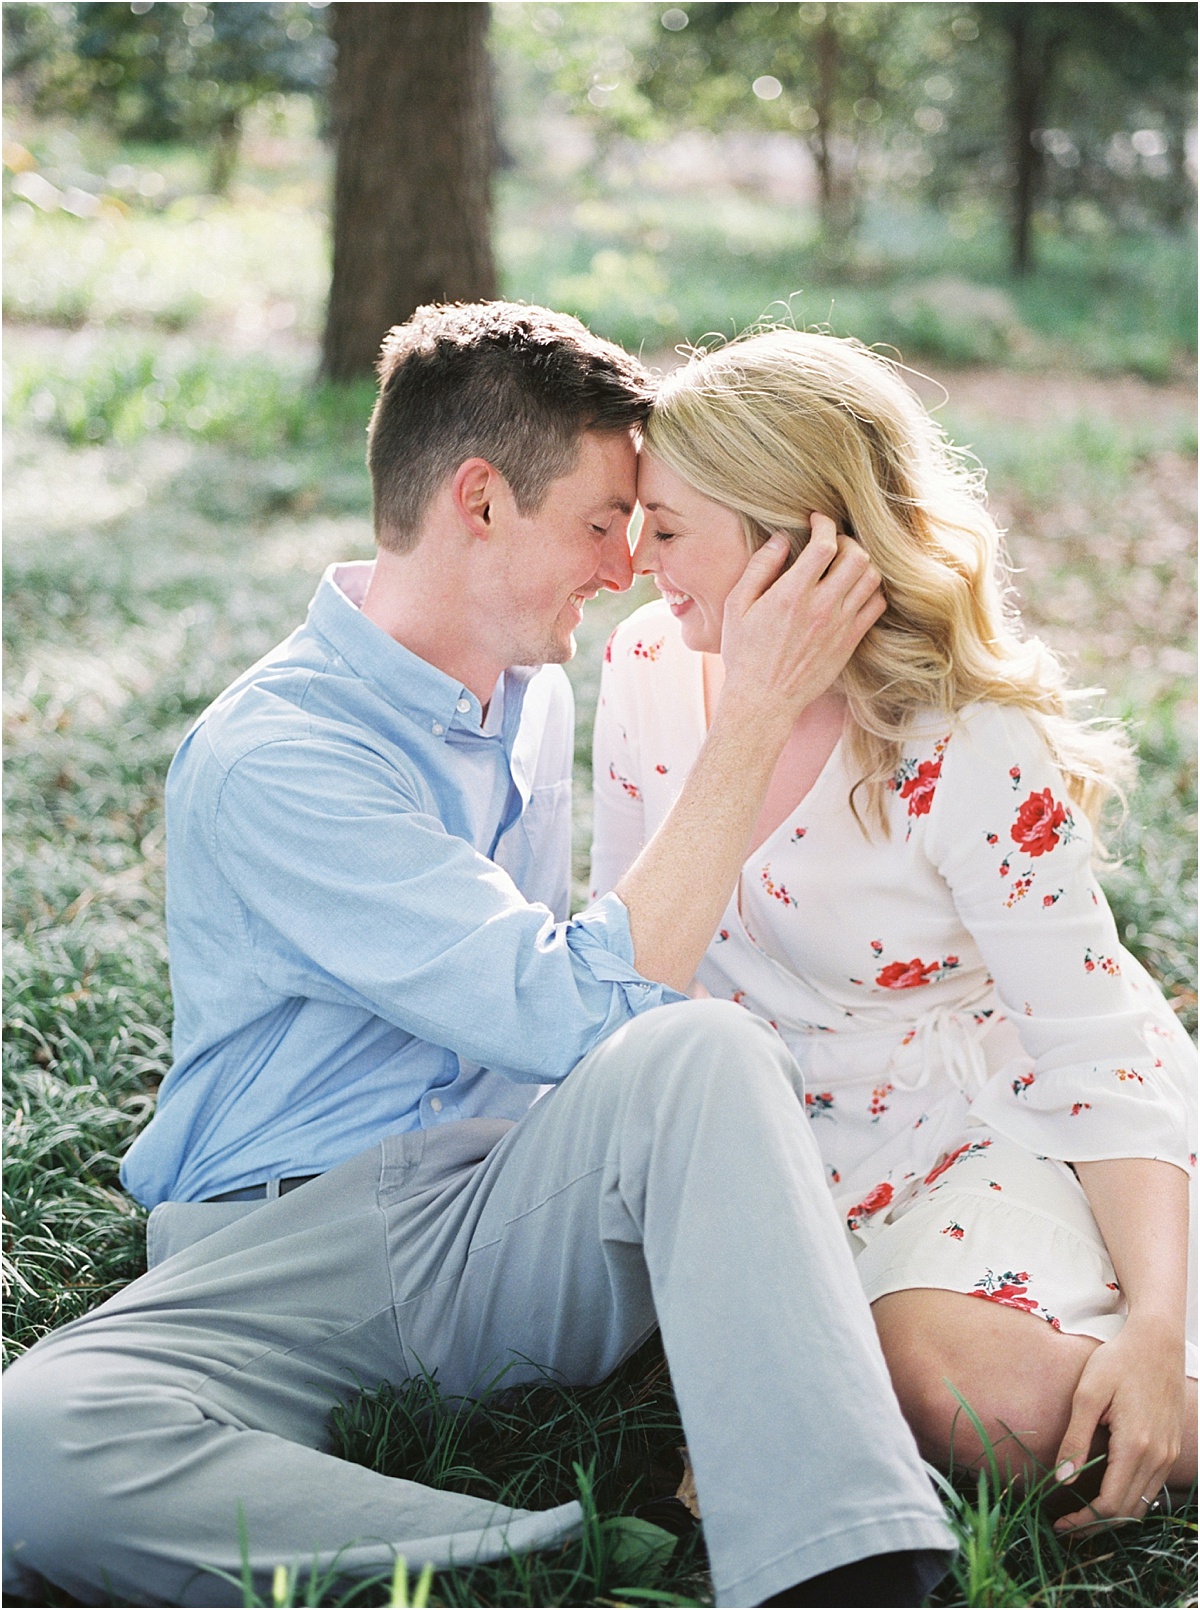 Ashley and Jamin || Wedding Photographer || Botanical Gardens, Downtown Engagement and Front Porch Session || Birmingham, AL